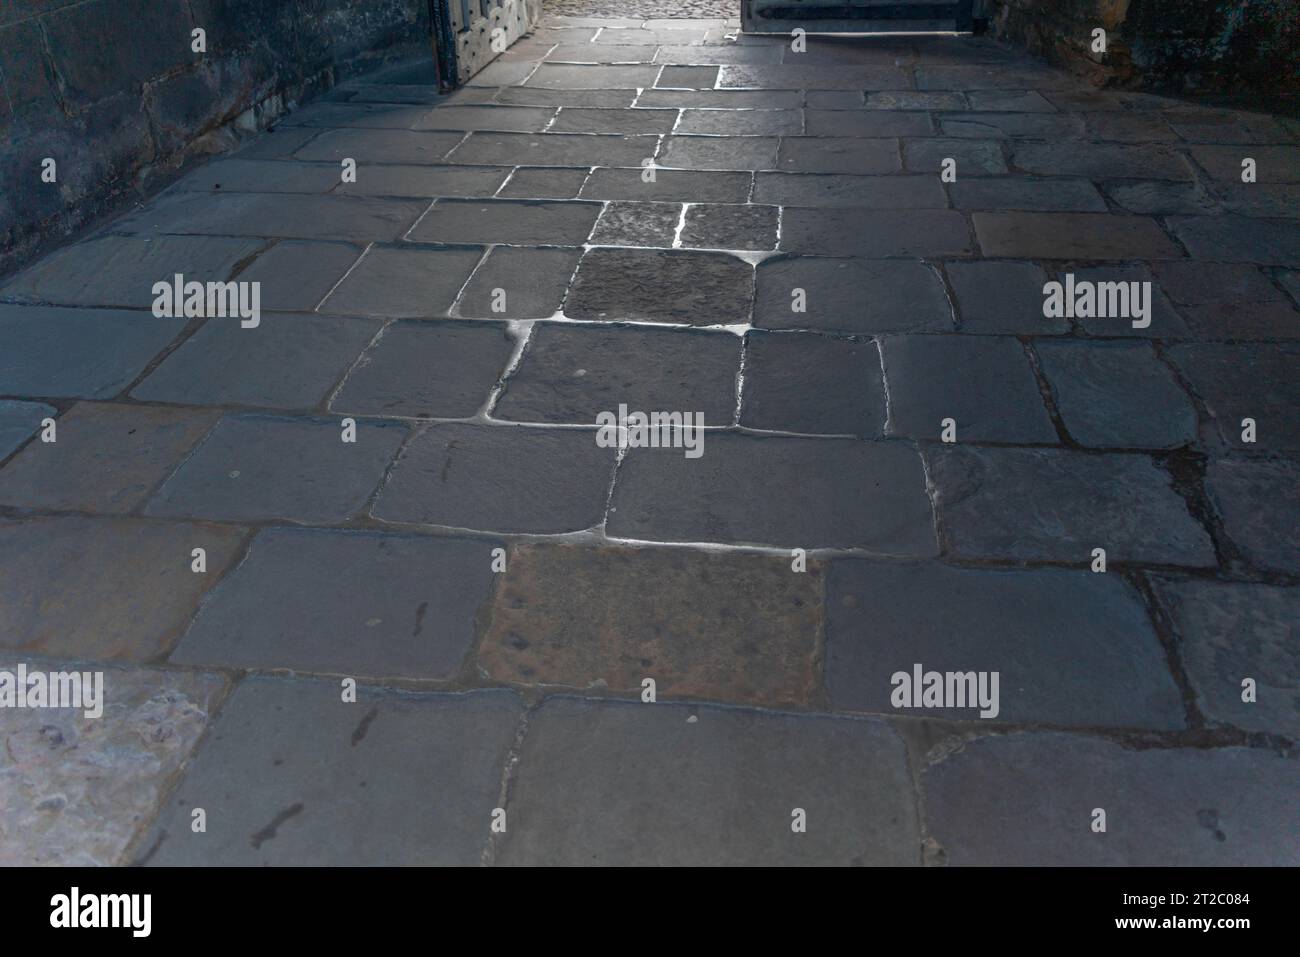 Slabs, walkway, walked smooth, centuries of use, thoroughfare, path, footfall, polished, sandstone, sedimentary rock, slippery, shadows, passage time. Stock Photo